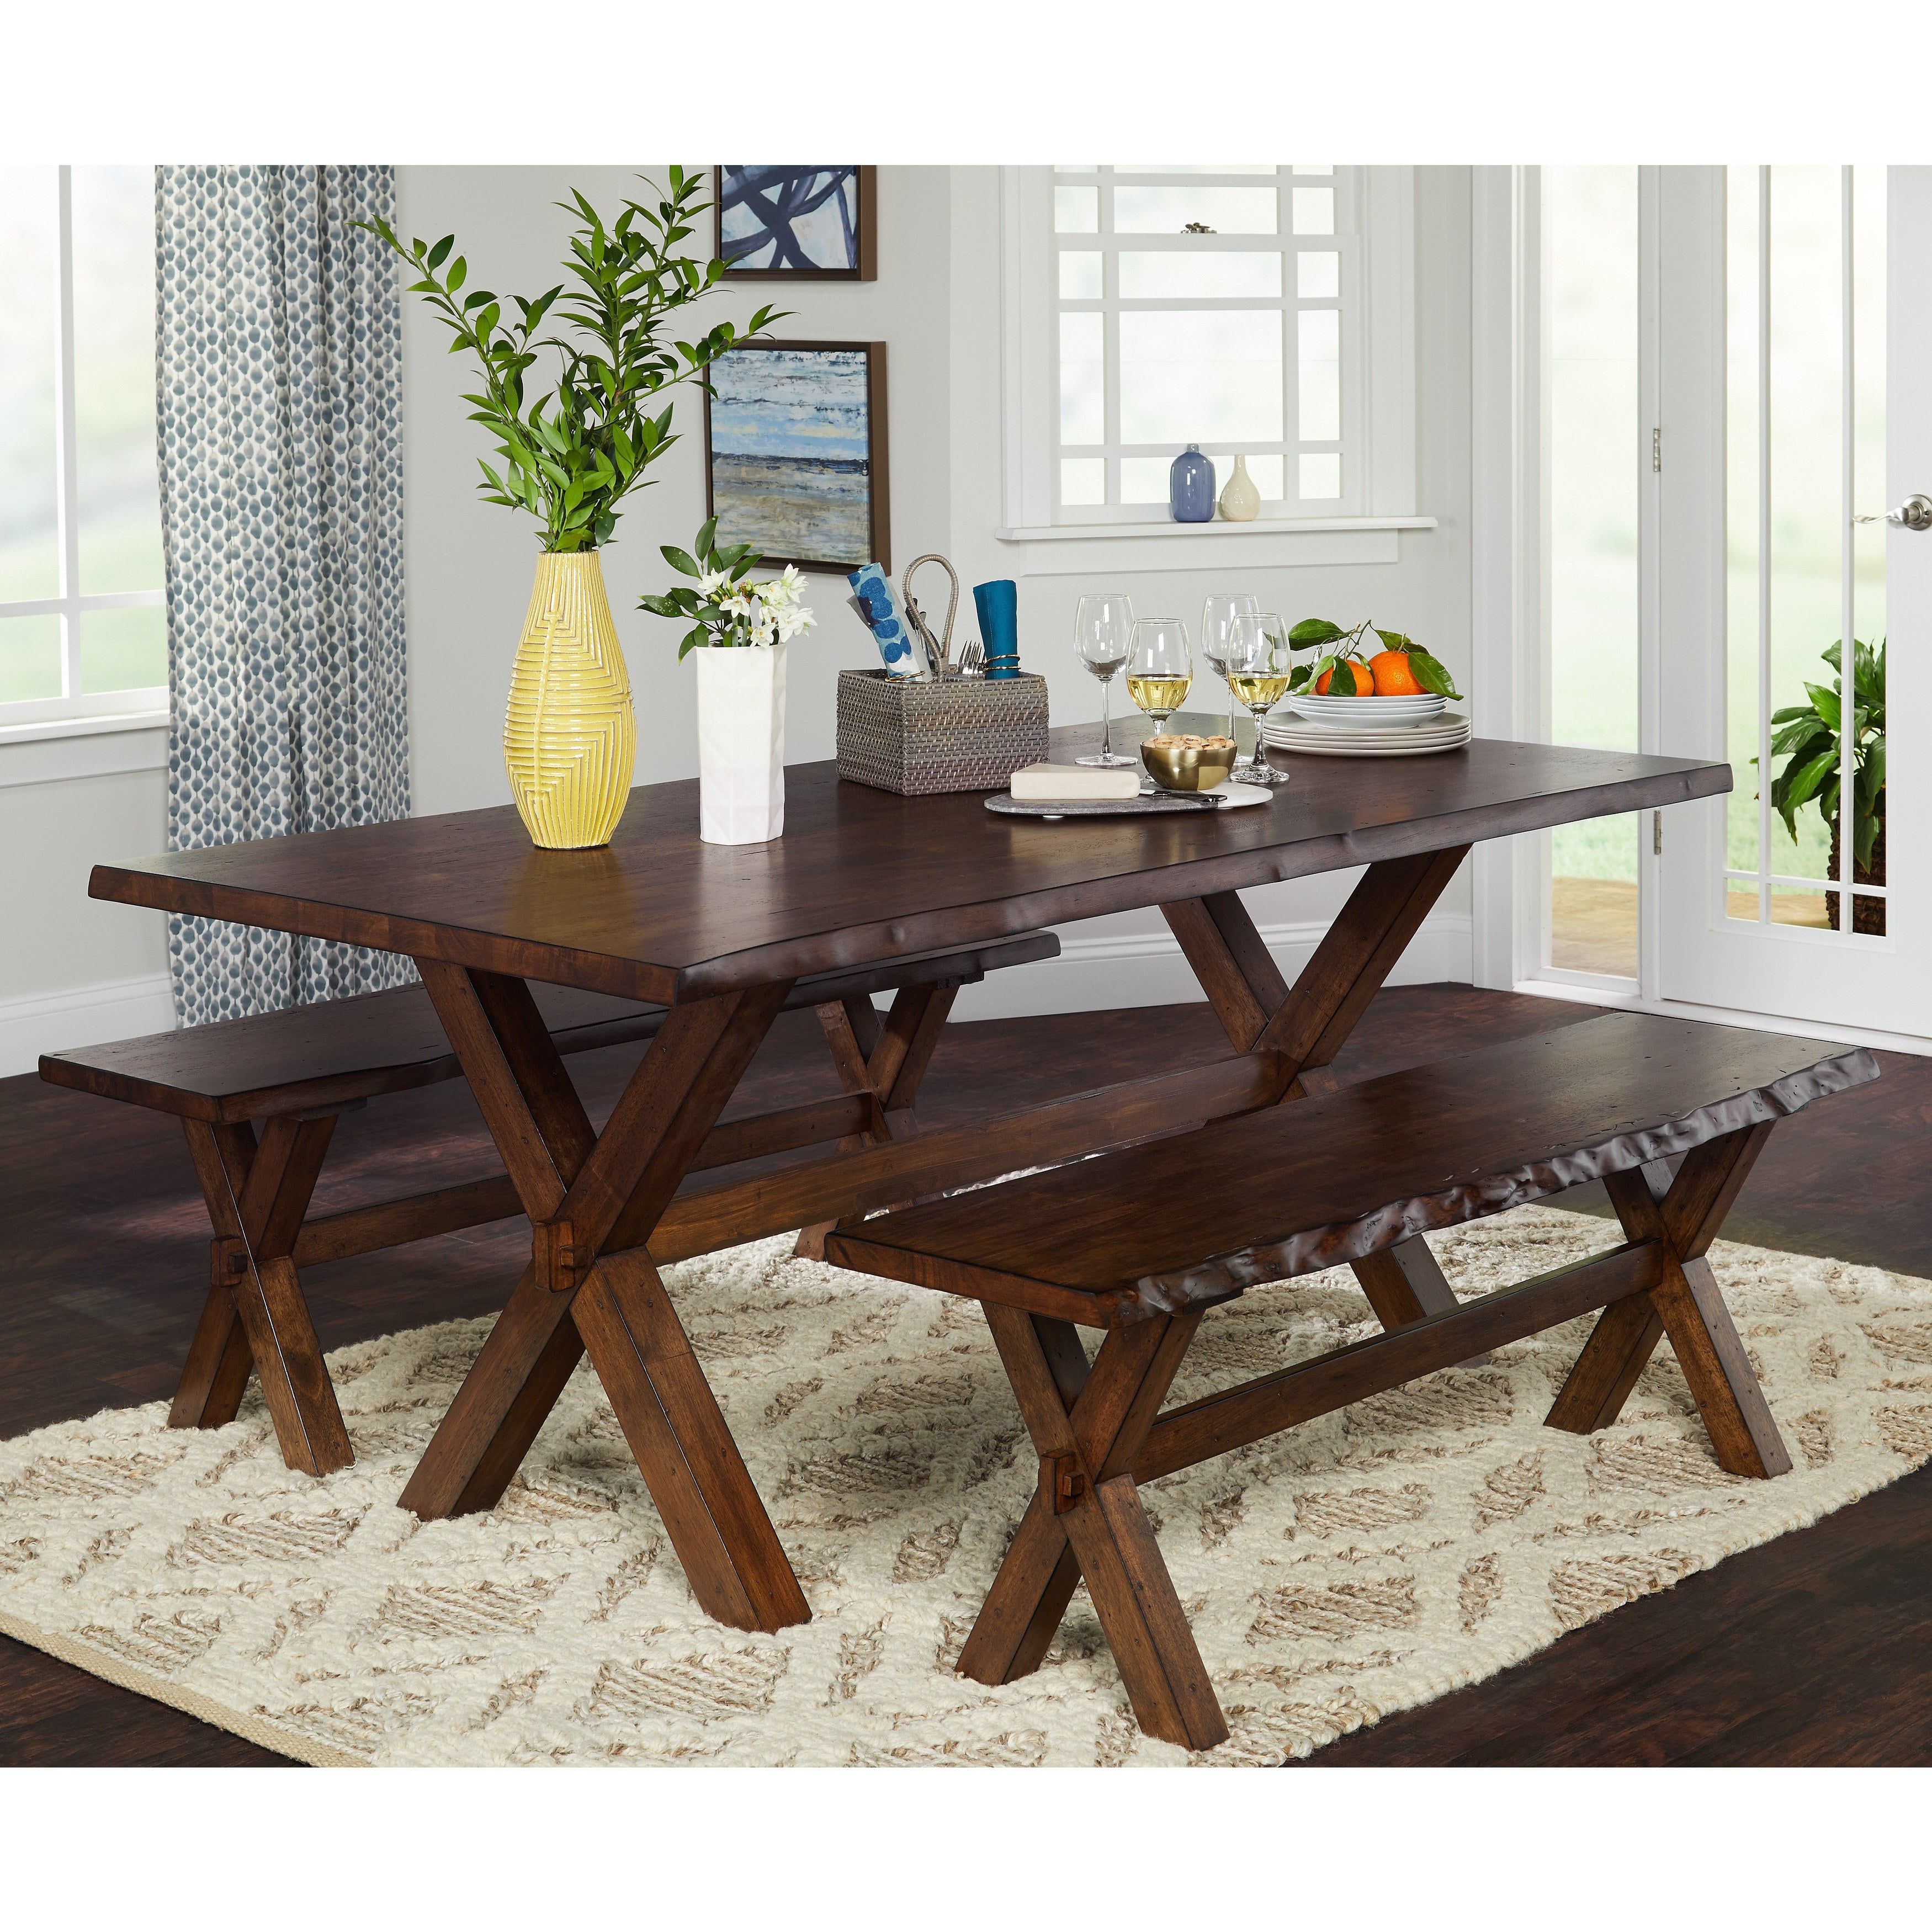 Buy 3 Piece Sets Kitchen & Dining Room Sets Online At Overstock Throughout Best And Newest Frida 3 Piece Dining Table Sets (View 3 of 20)